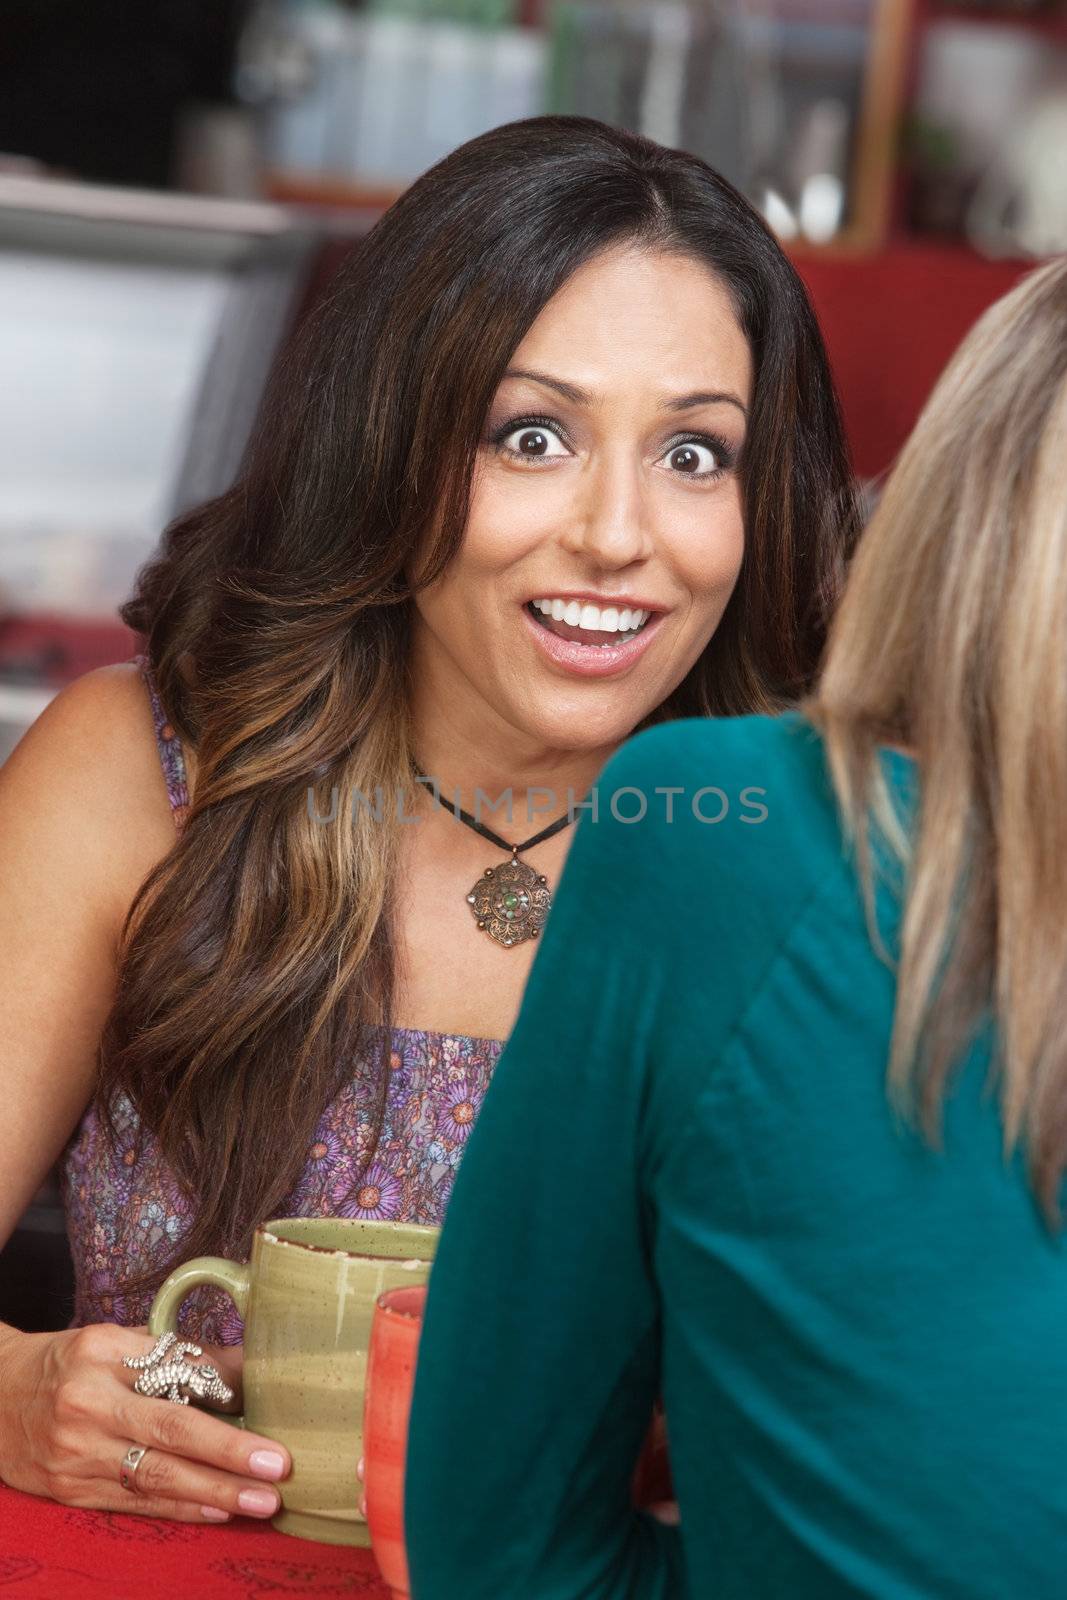 Shocked Woman with Smile in Cafe by Creatista